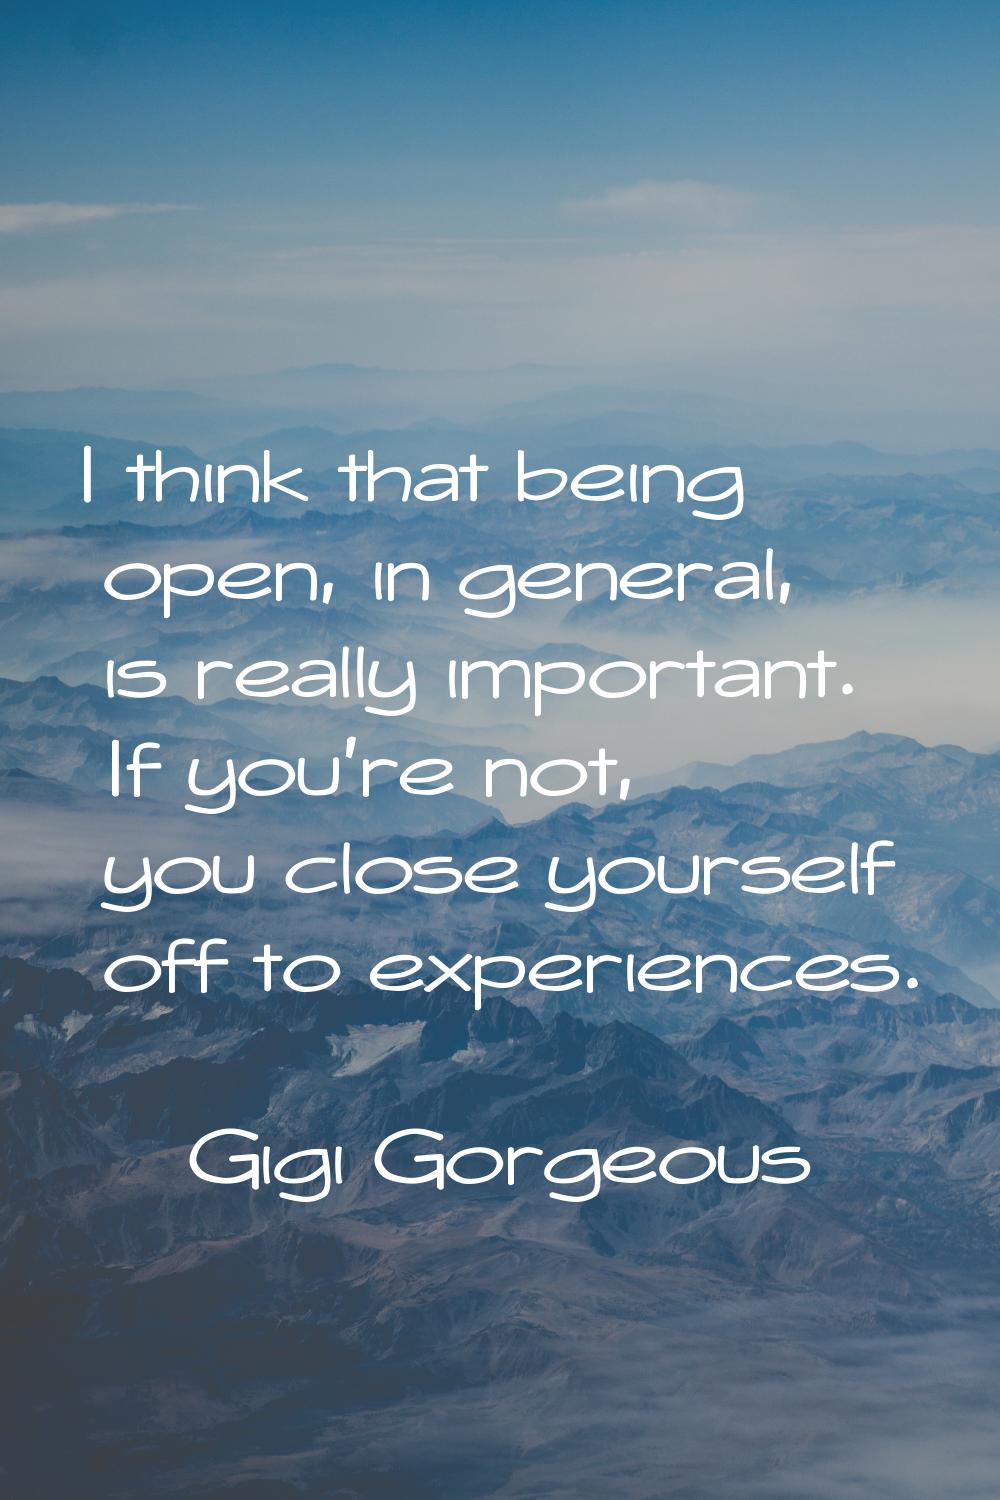 I think that being open, in general, is really important. If you're not, you close yourself off to 